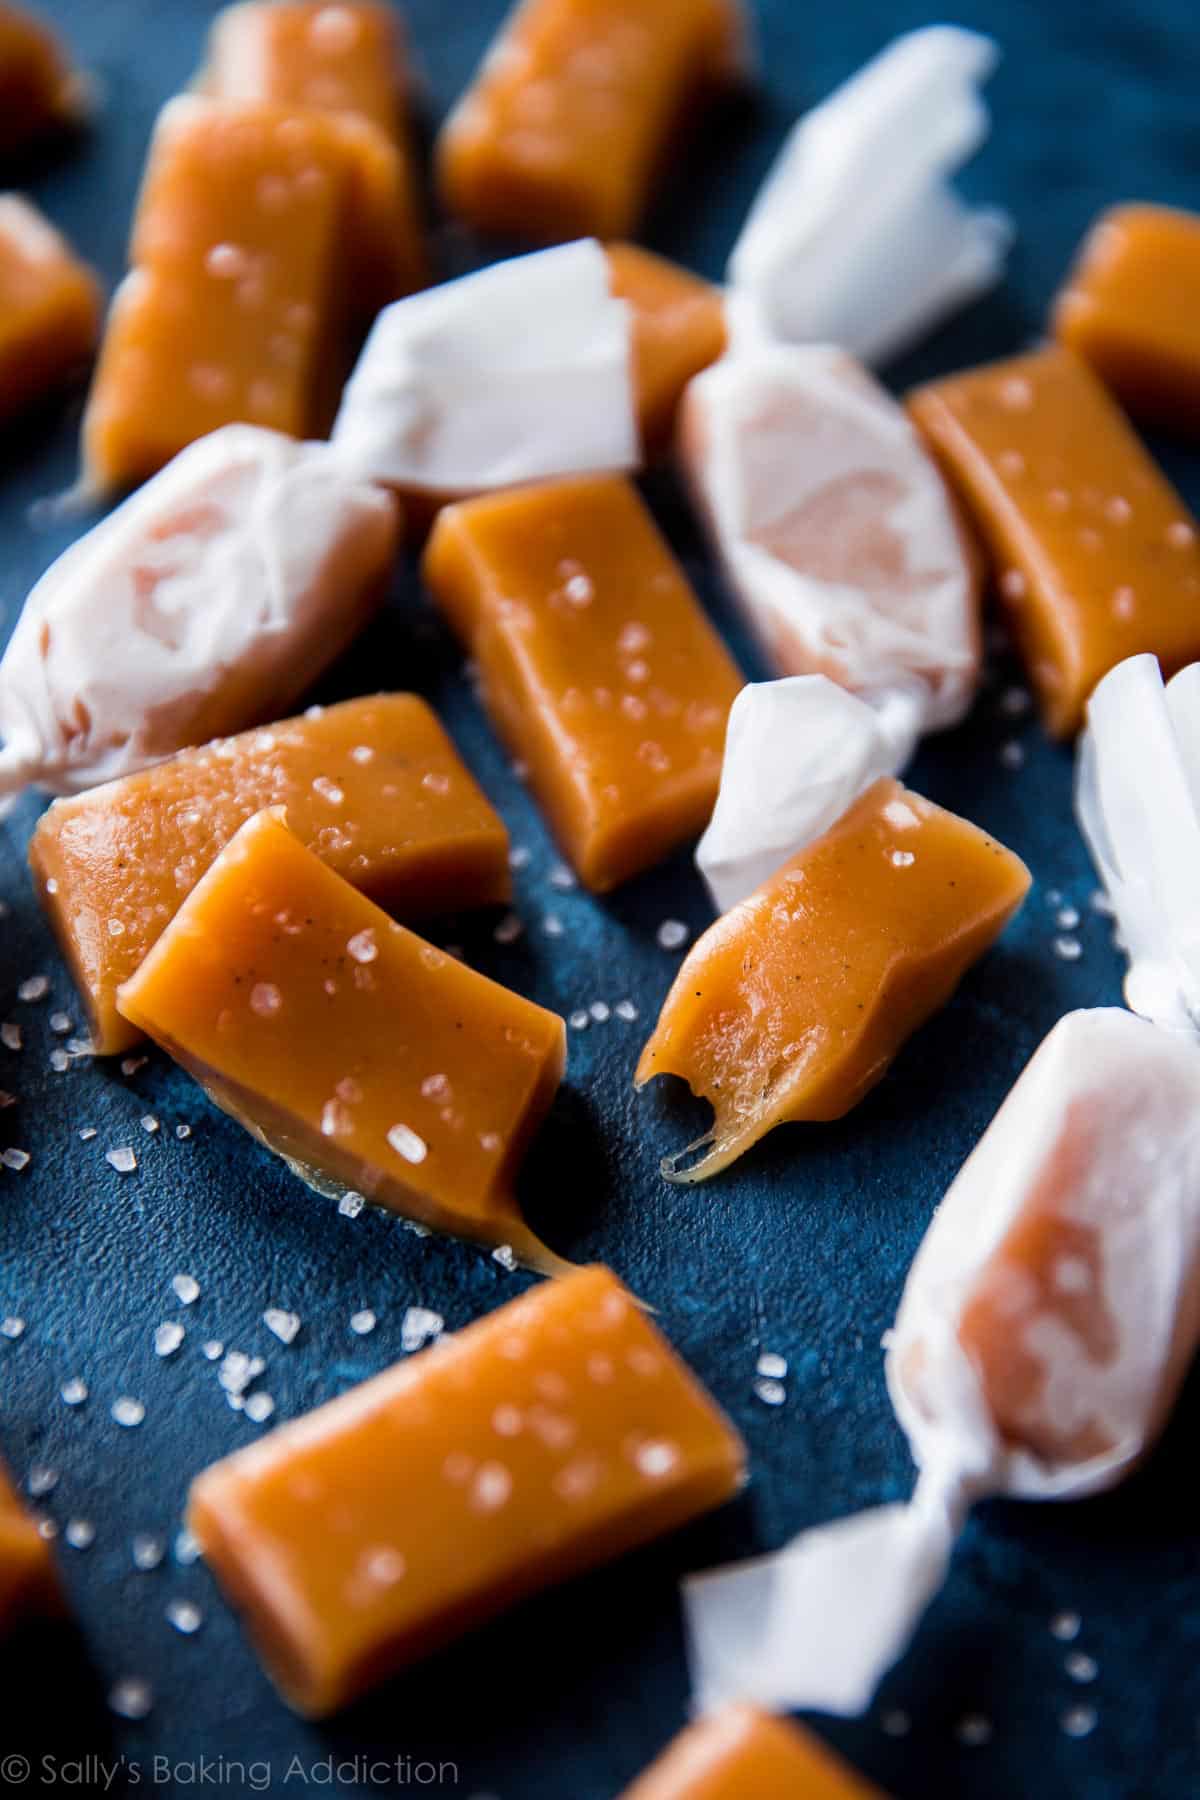 sea salt vanilla caramels cut into small rectangles with some wrapped in candy wrappers